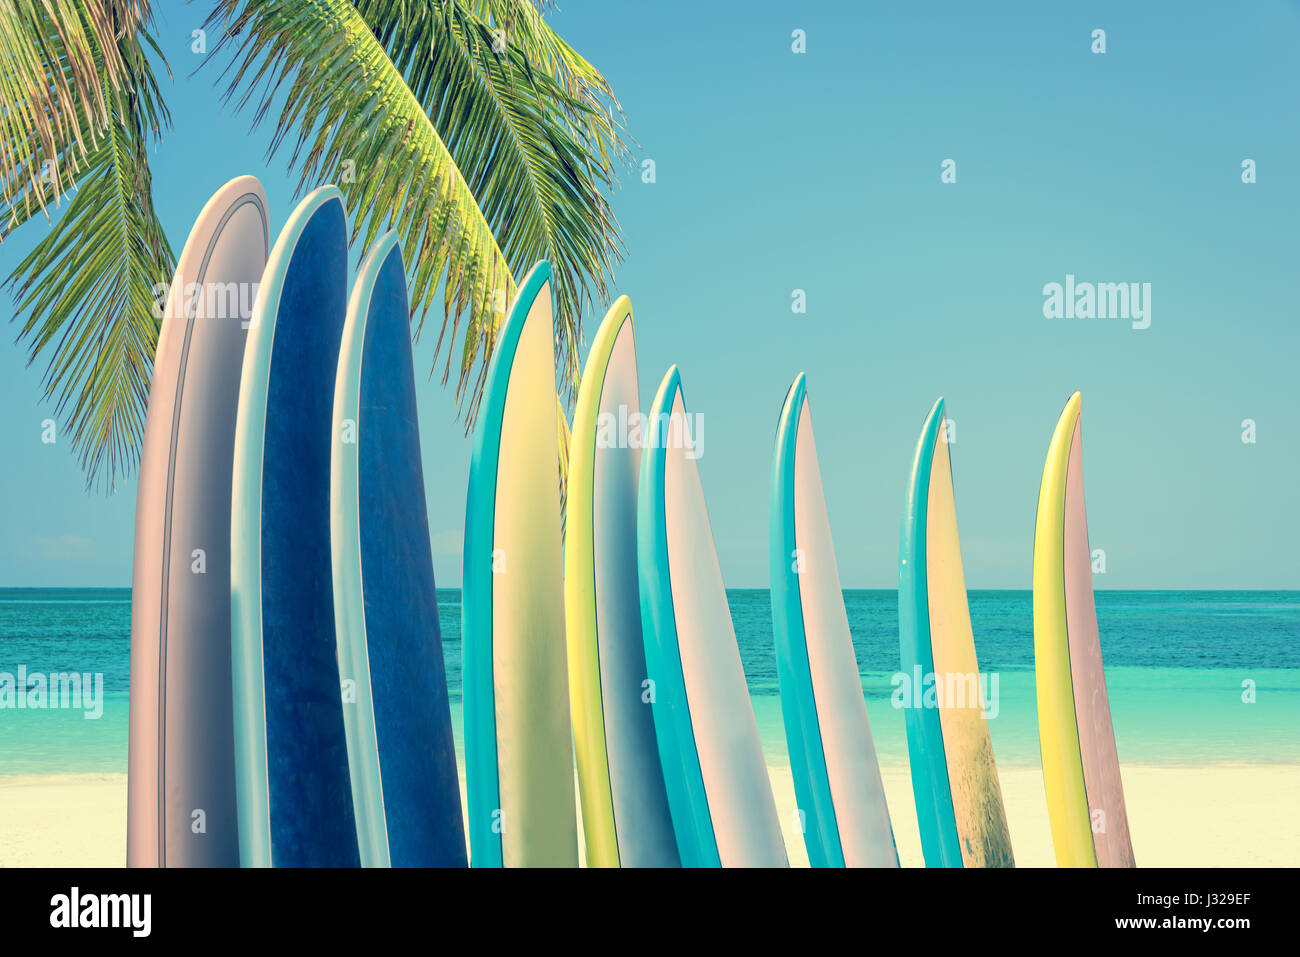 Stack of colorful surfboards on a tropical beach by the ocean with palm tree, retro vintage filter Stock Photo